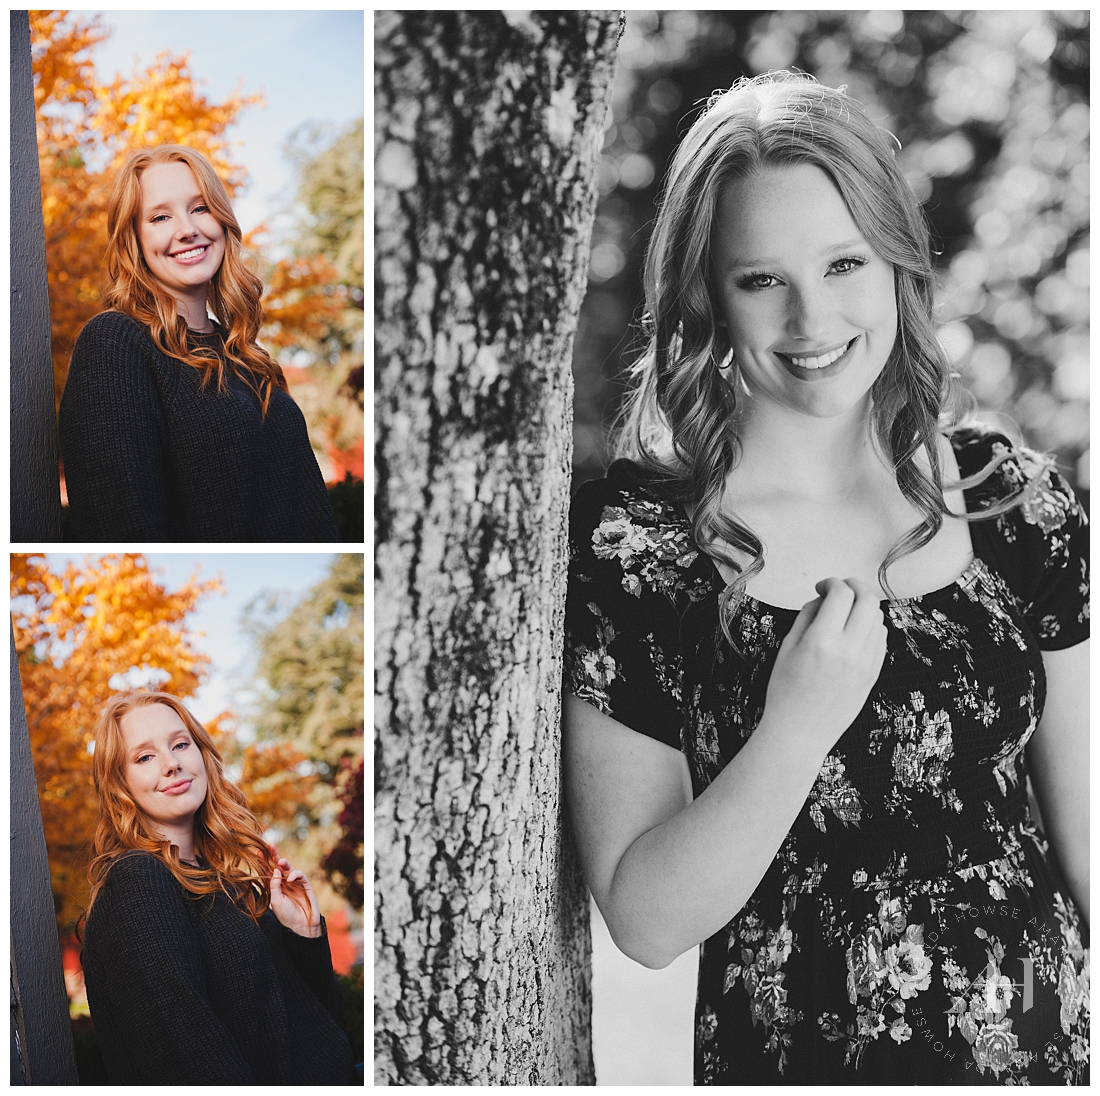 Autumn senior portraits in Tacoma with floral dress and colorful tree photographed by Amanda Howse